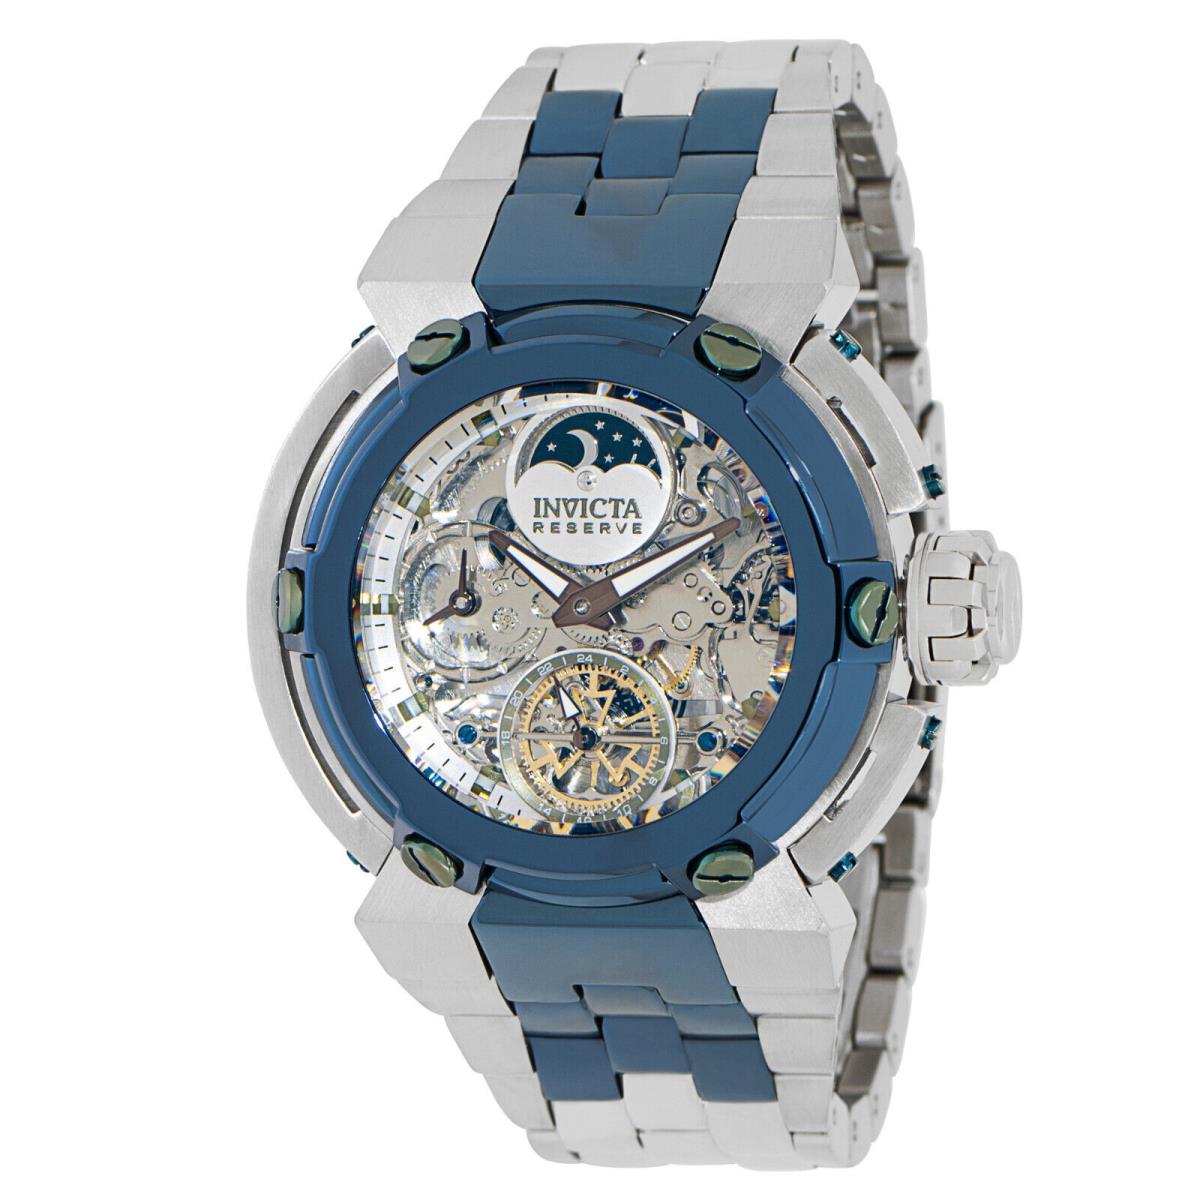 Invicta Reserve X-wing 44234 Automatic Day/night Moon Phase Skeletonized W/case